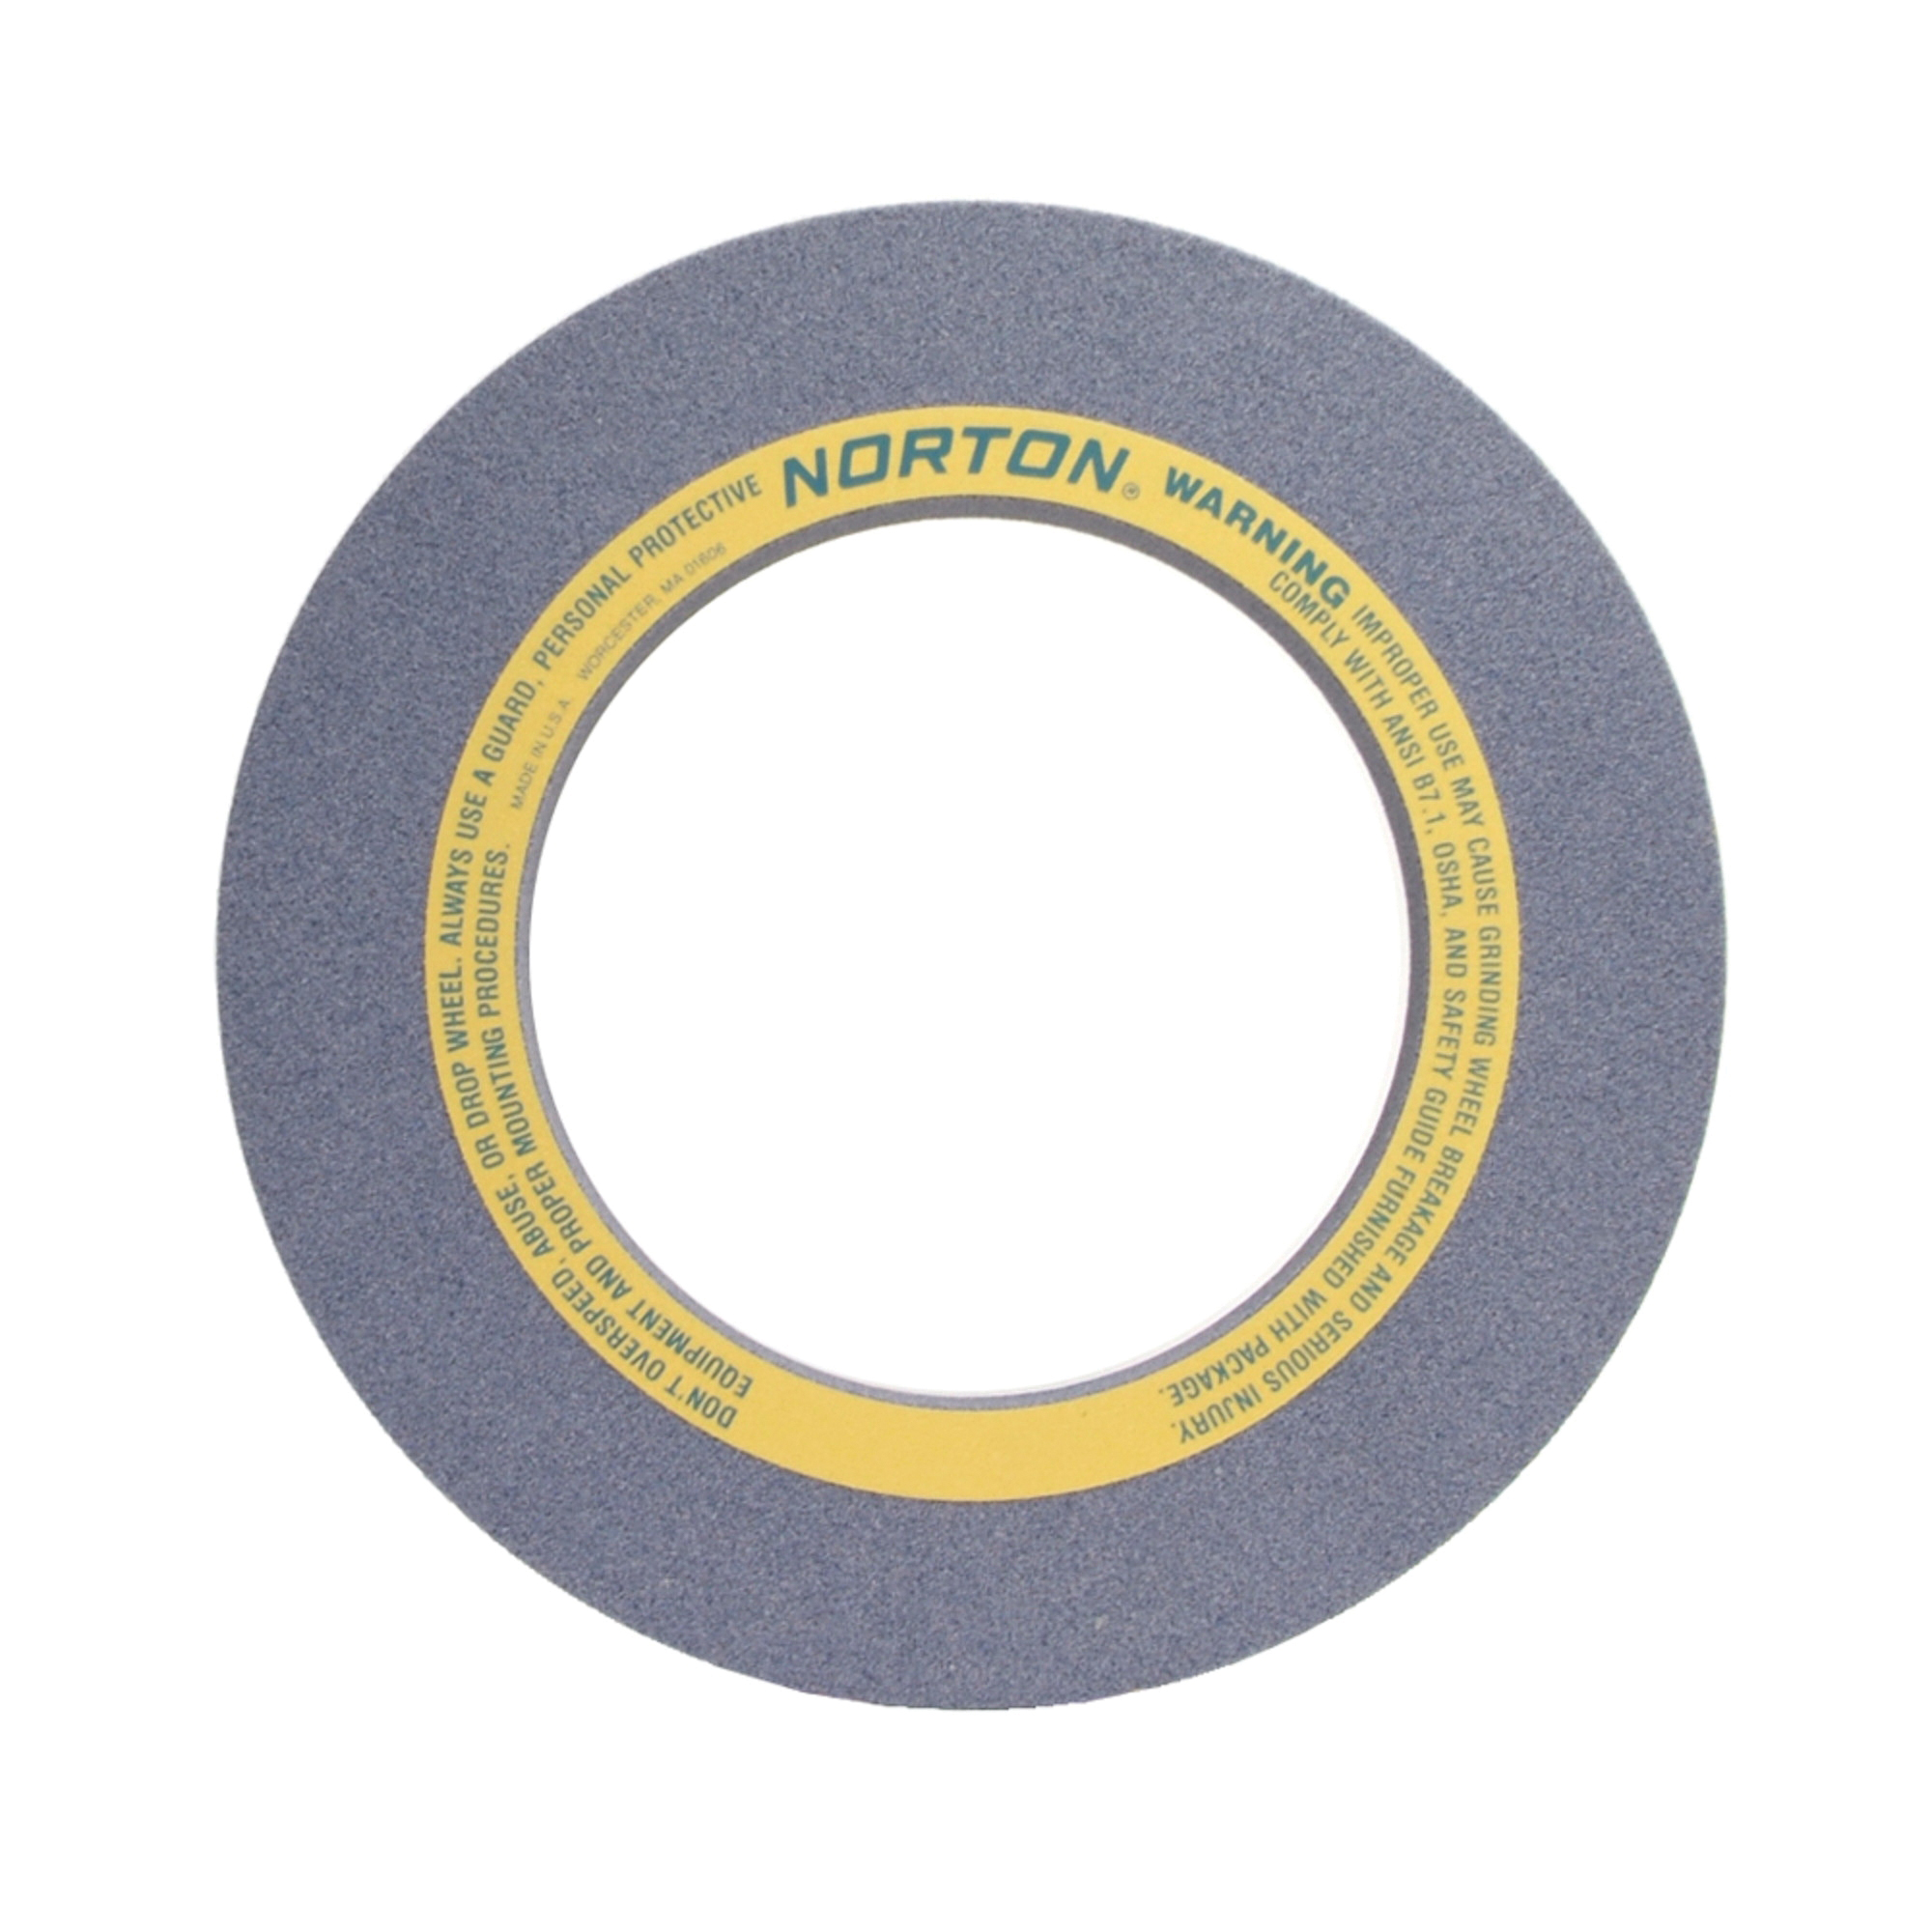 Norton® 69078665455 32A Straight Surface and Cylindrical Grinding Wheel, 20 in Dia x 2 in THK, 12 in Center Hole, 46 Grit, Aluminum Oxide Abrasive